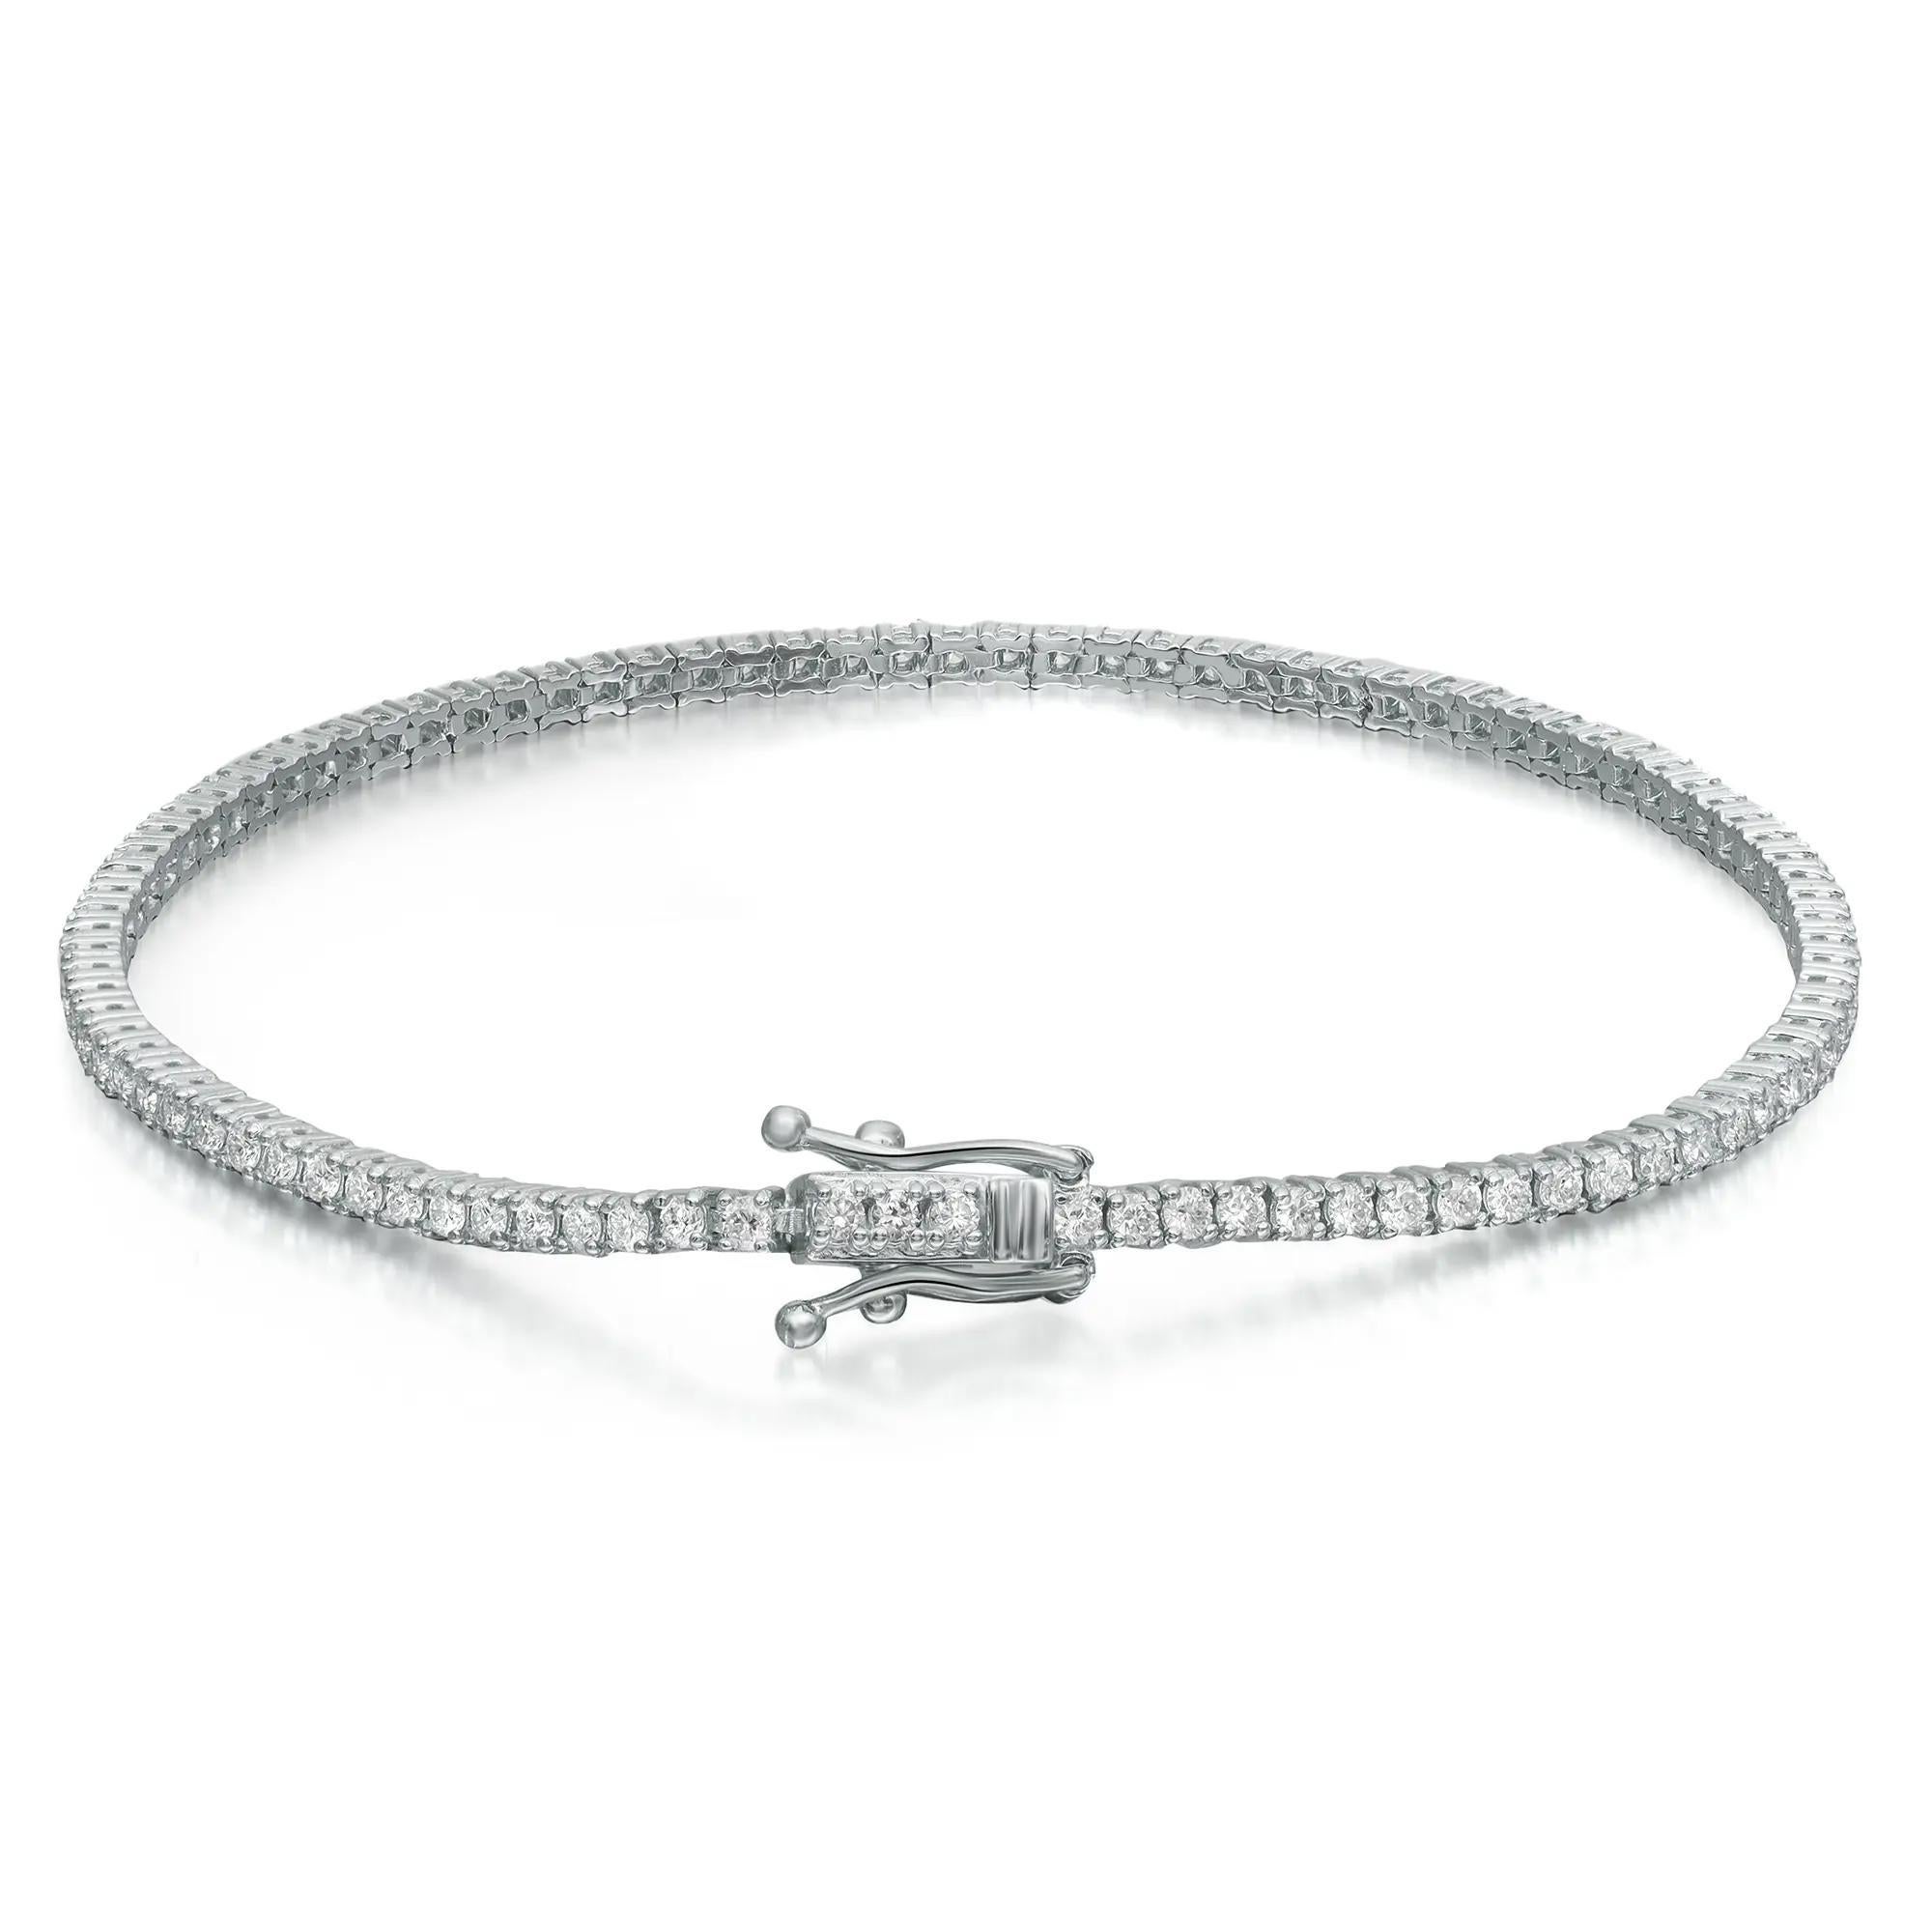 This beautifully crafted Rachel Koen tennis bracelet features prong set round brilliant cut diamonds studded in lustrous 14K white gold. Total diamond weight: 0.95 carat. Diamond Quality: G-H color and VS-SI clarity. Bracelet length: 7 inches.